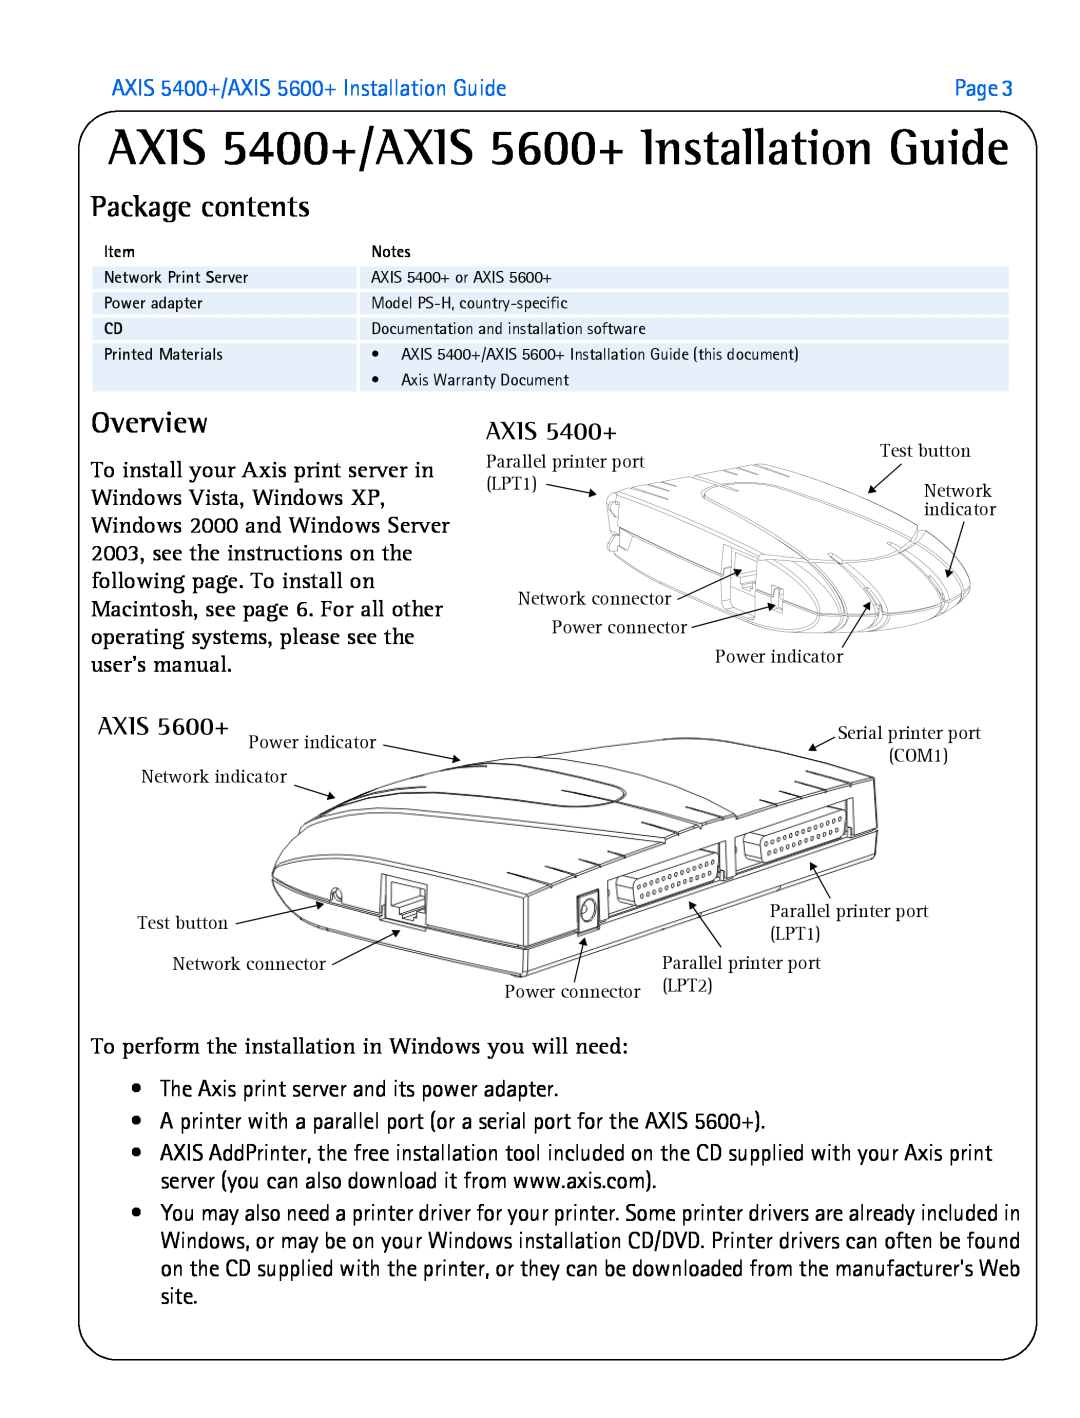 Axis Communications manual Package contents, Overview, AXIS 5400+/AXIS 5600+ Installation Guide 